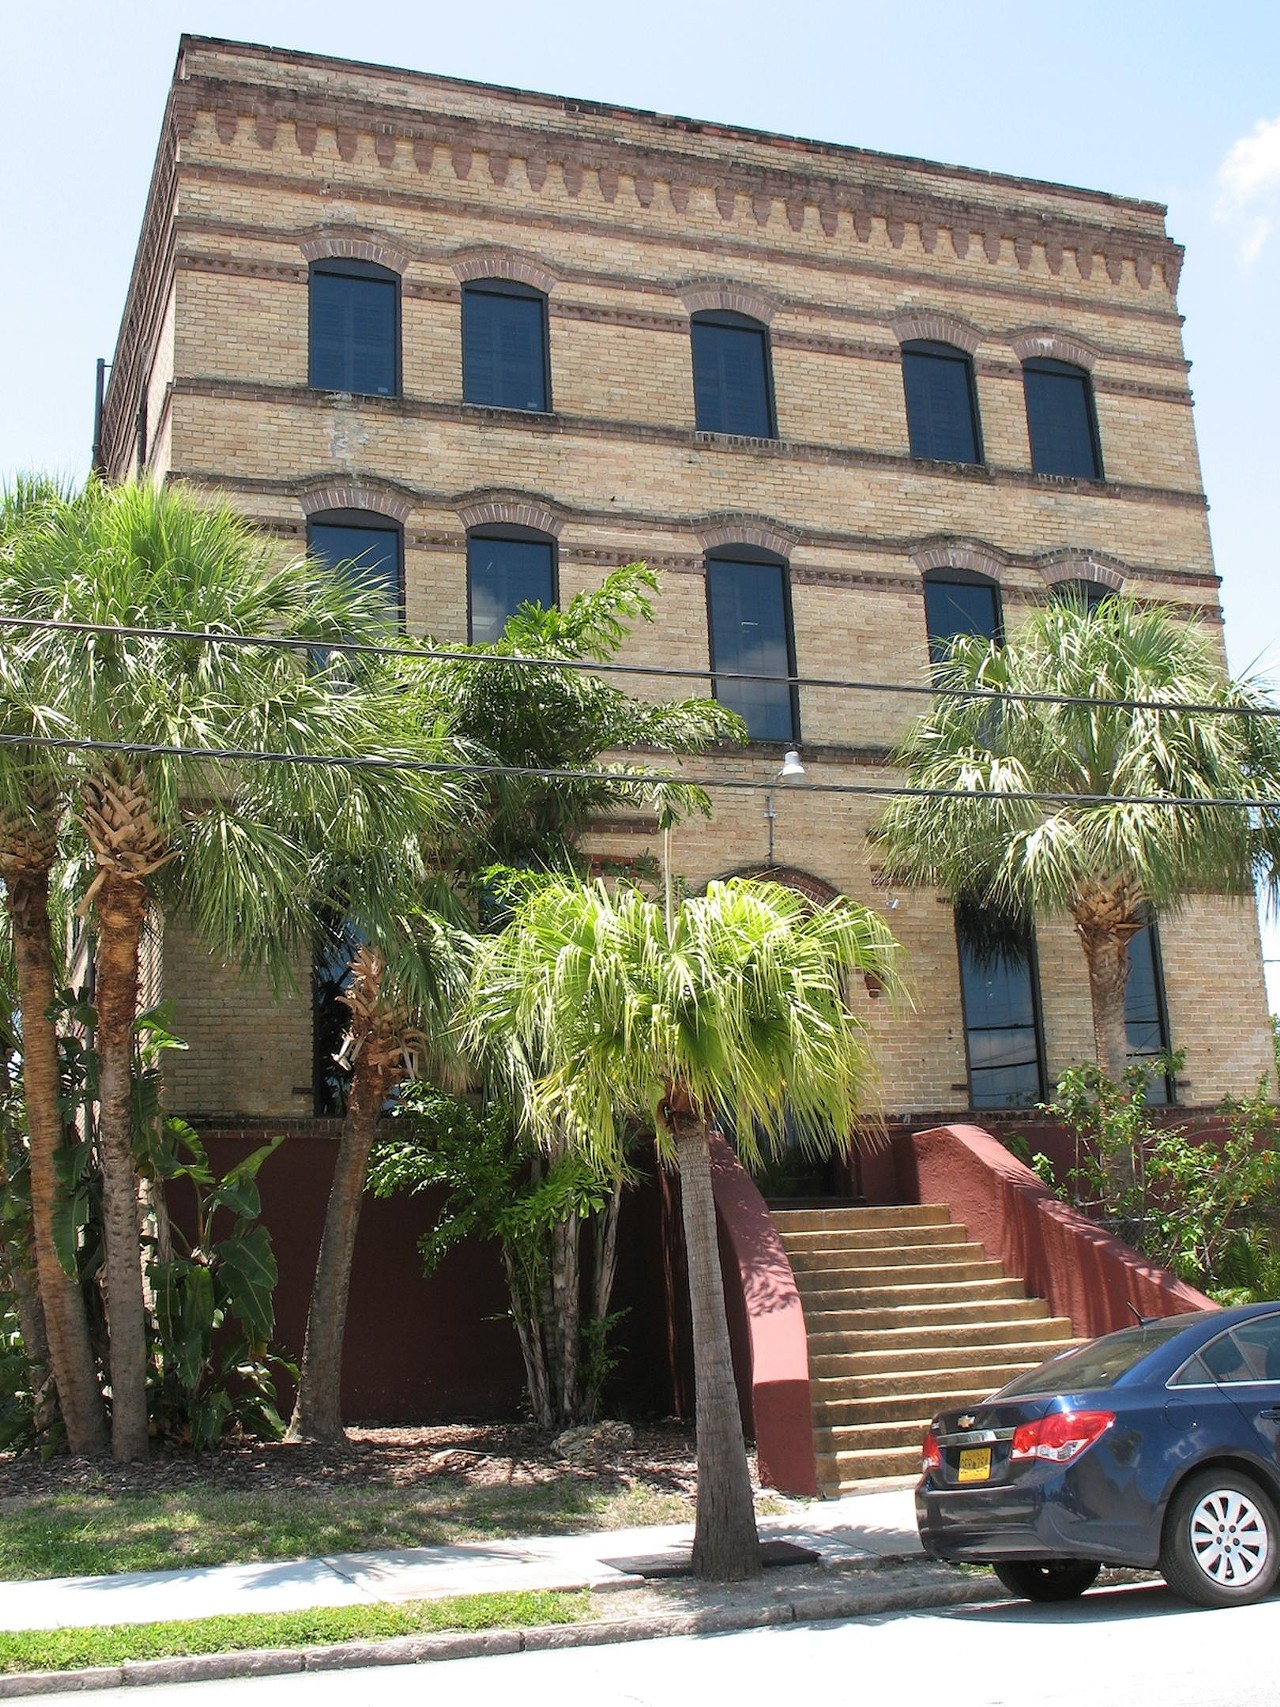 The former San Martin & Leon Cigar Factory in West Tampa